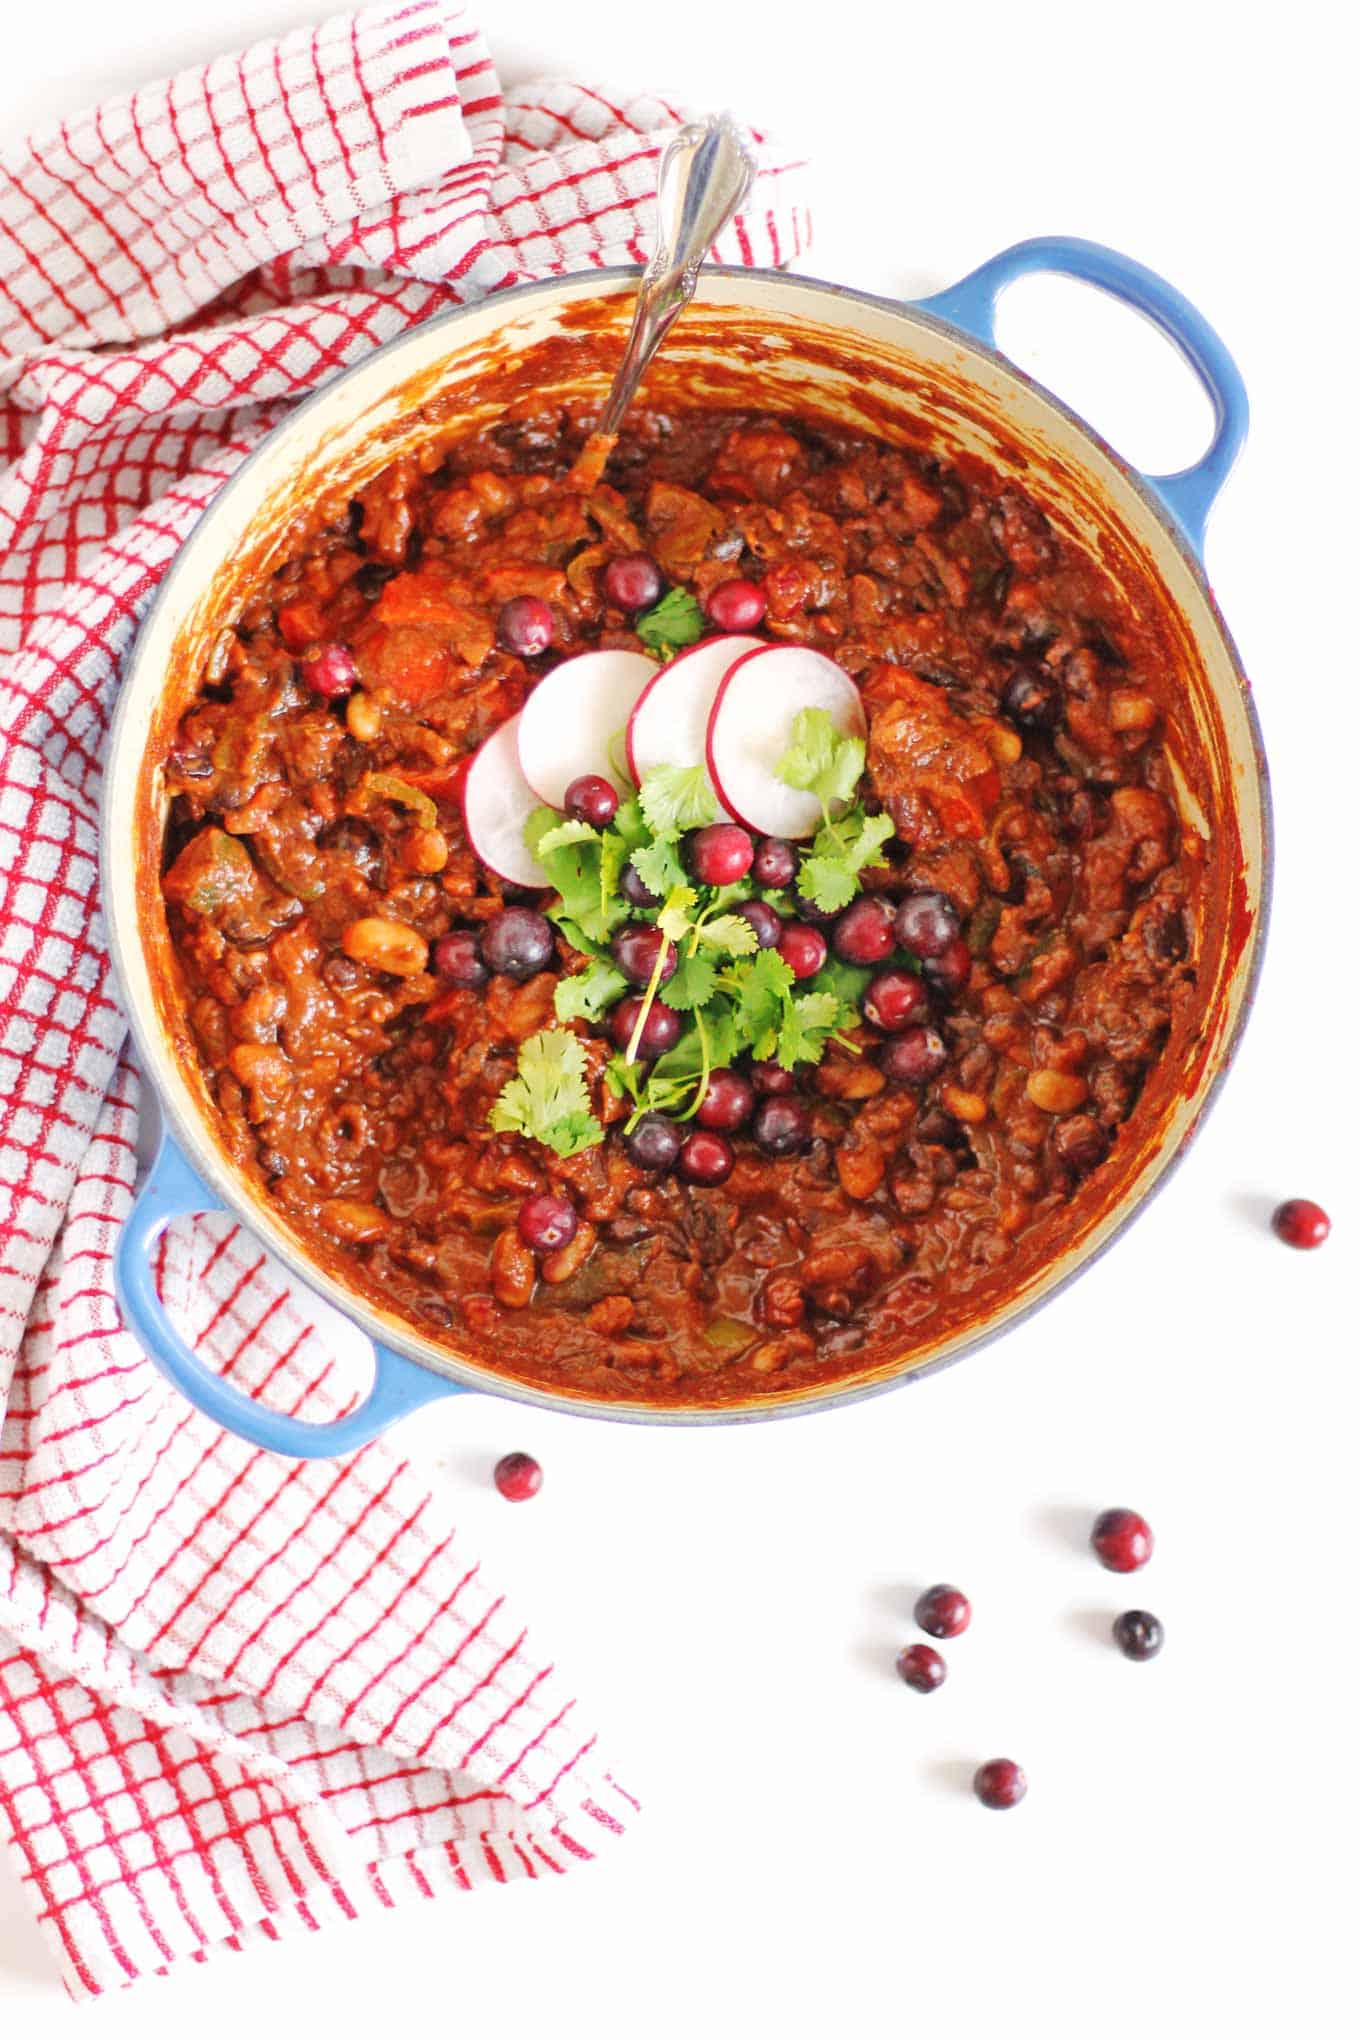 Vegan cranberry chili with cinnamon and cocoa recipe! A warming, cozy fall or winter dinner the whole family will love. // Rhubarbarians // vegan dinner / vegetarian dinner / vegan comfort food / vegetarian comfort food / cranberry recipes / savory cranberry / #vegan #vegandinner #comfortfood #falldinner #cranberry #vegetarian